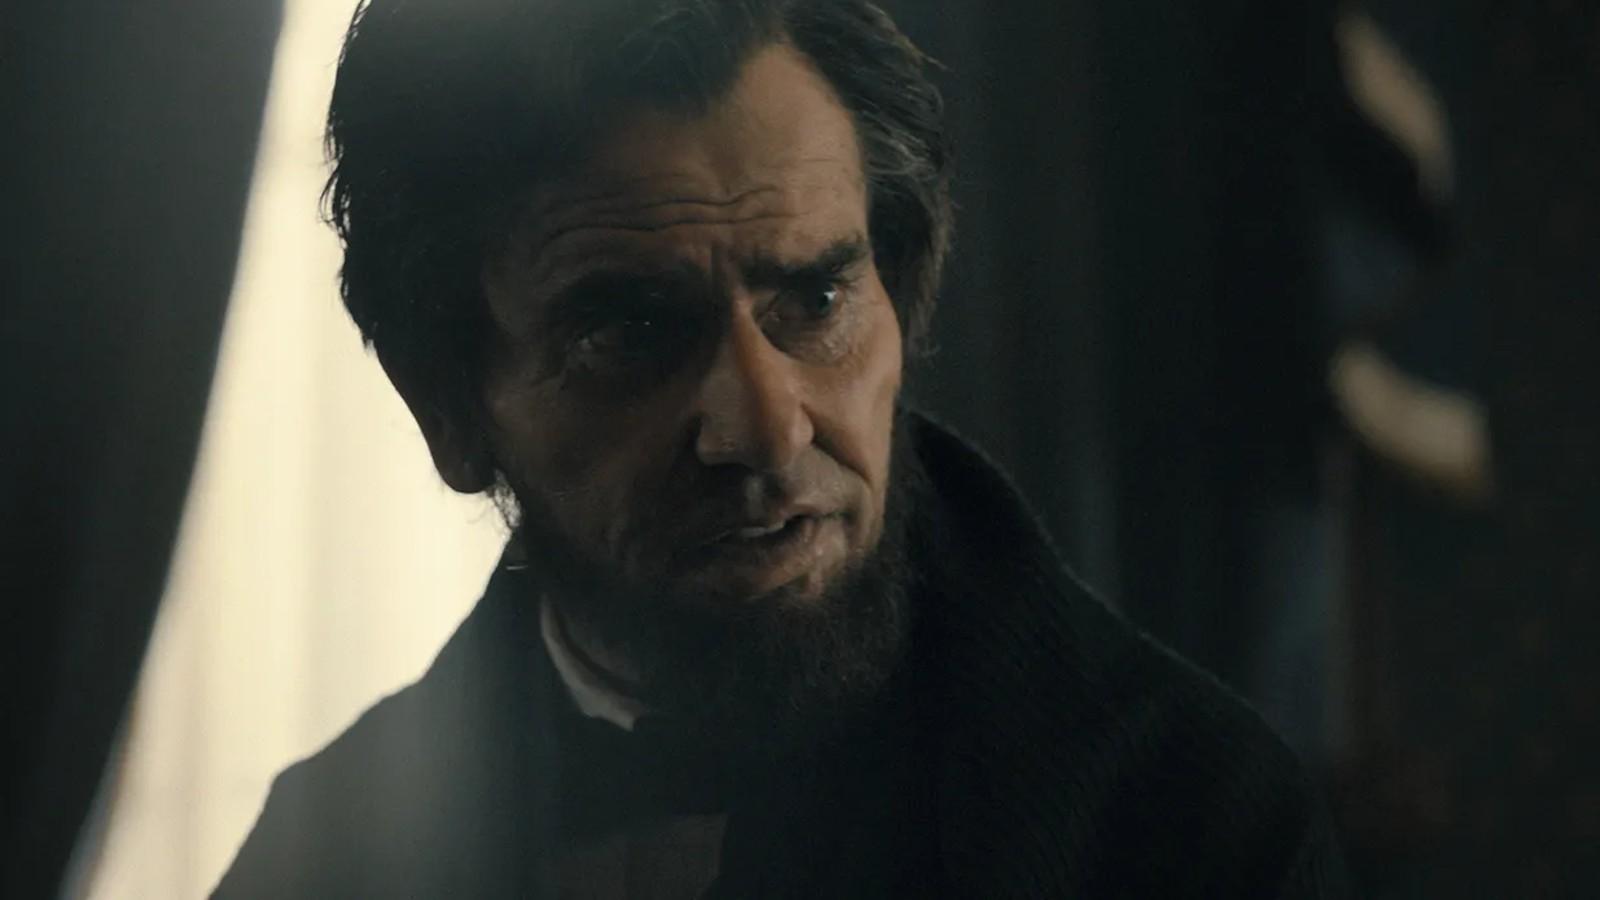 Hamish Linklater looking concerned as Abraham Lincoln in Manhunt.